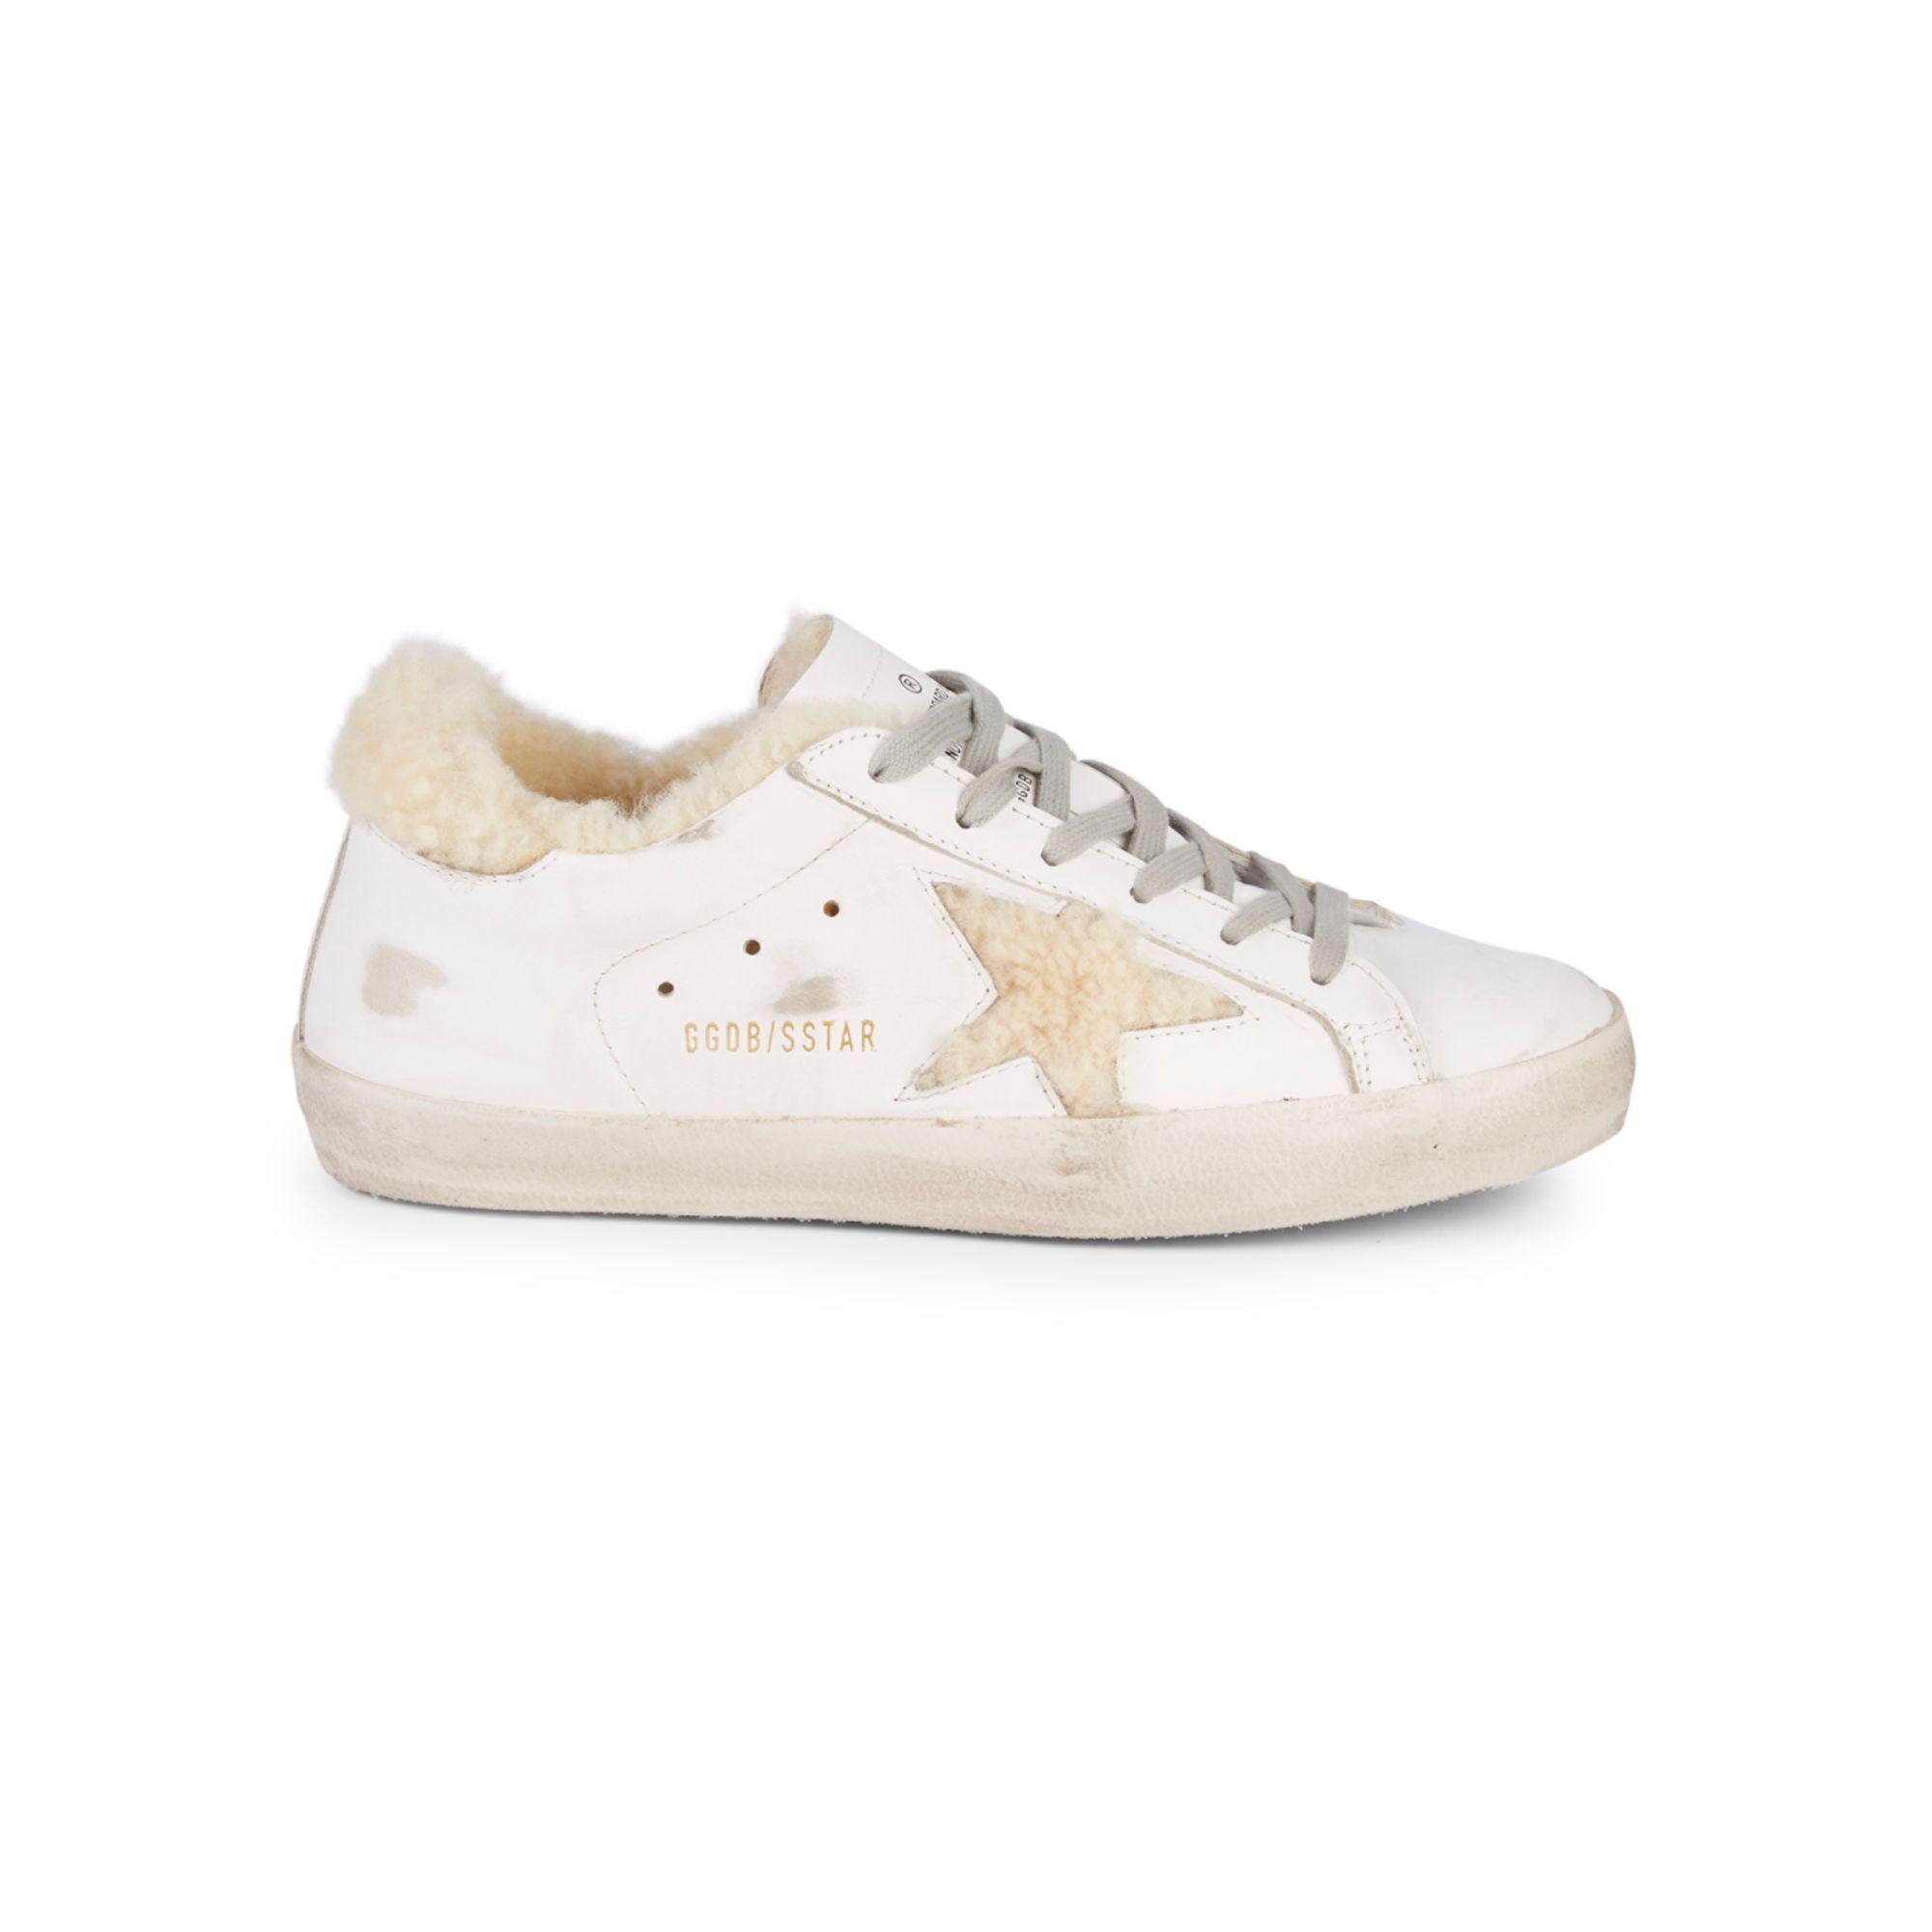 Golden Goose Superstar Shearling Lined Sneakers in White | Lyst